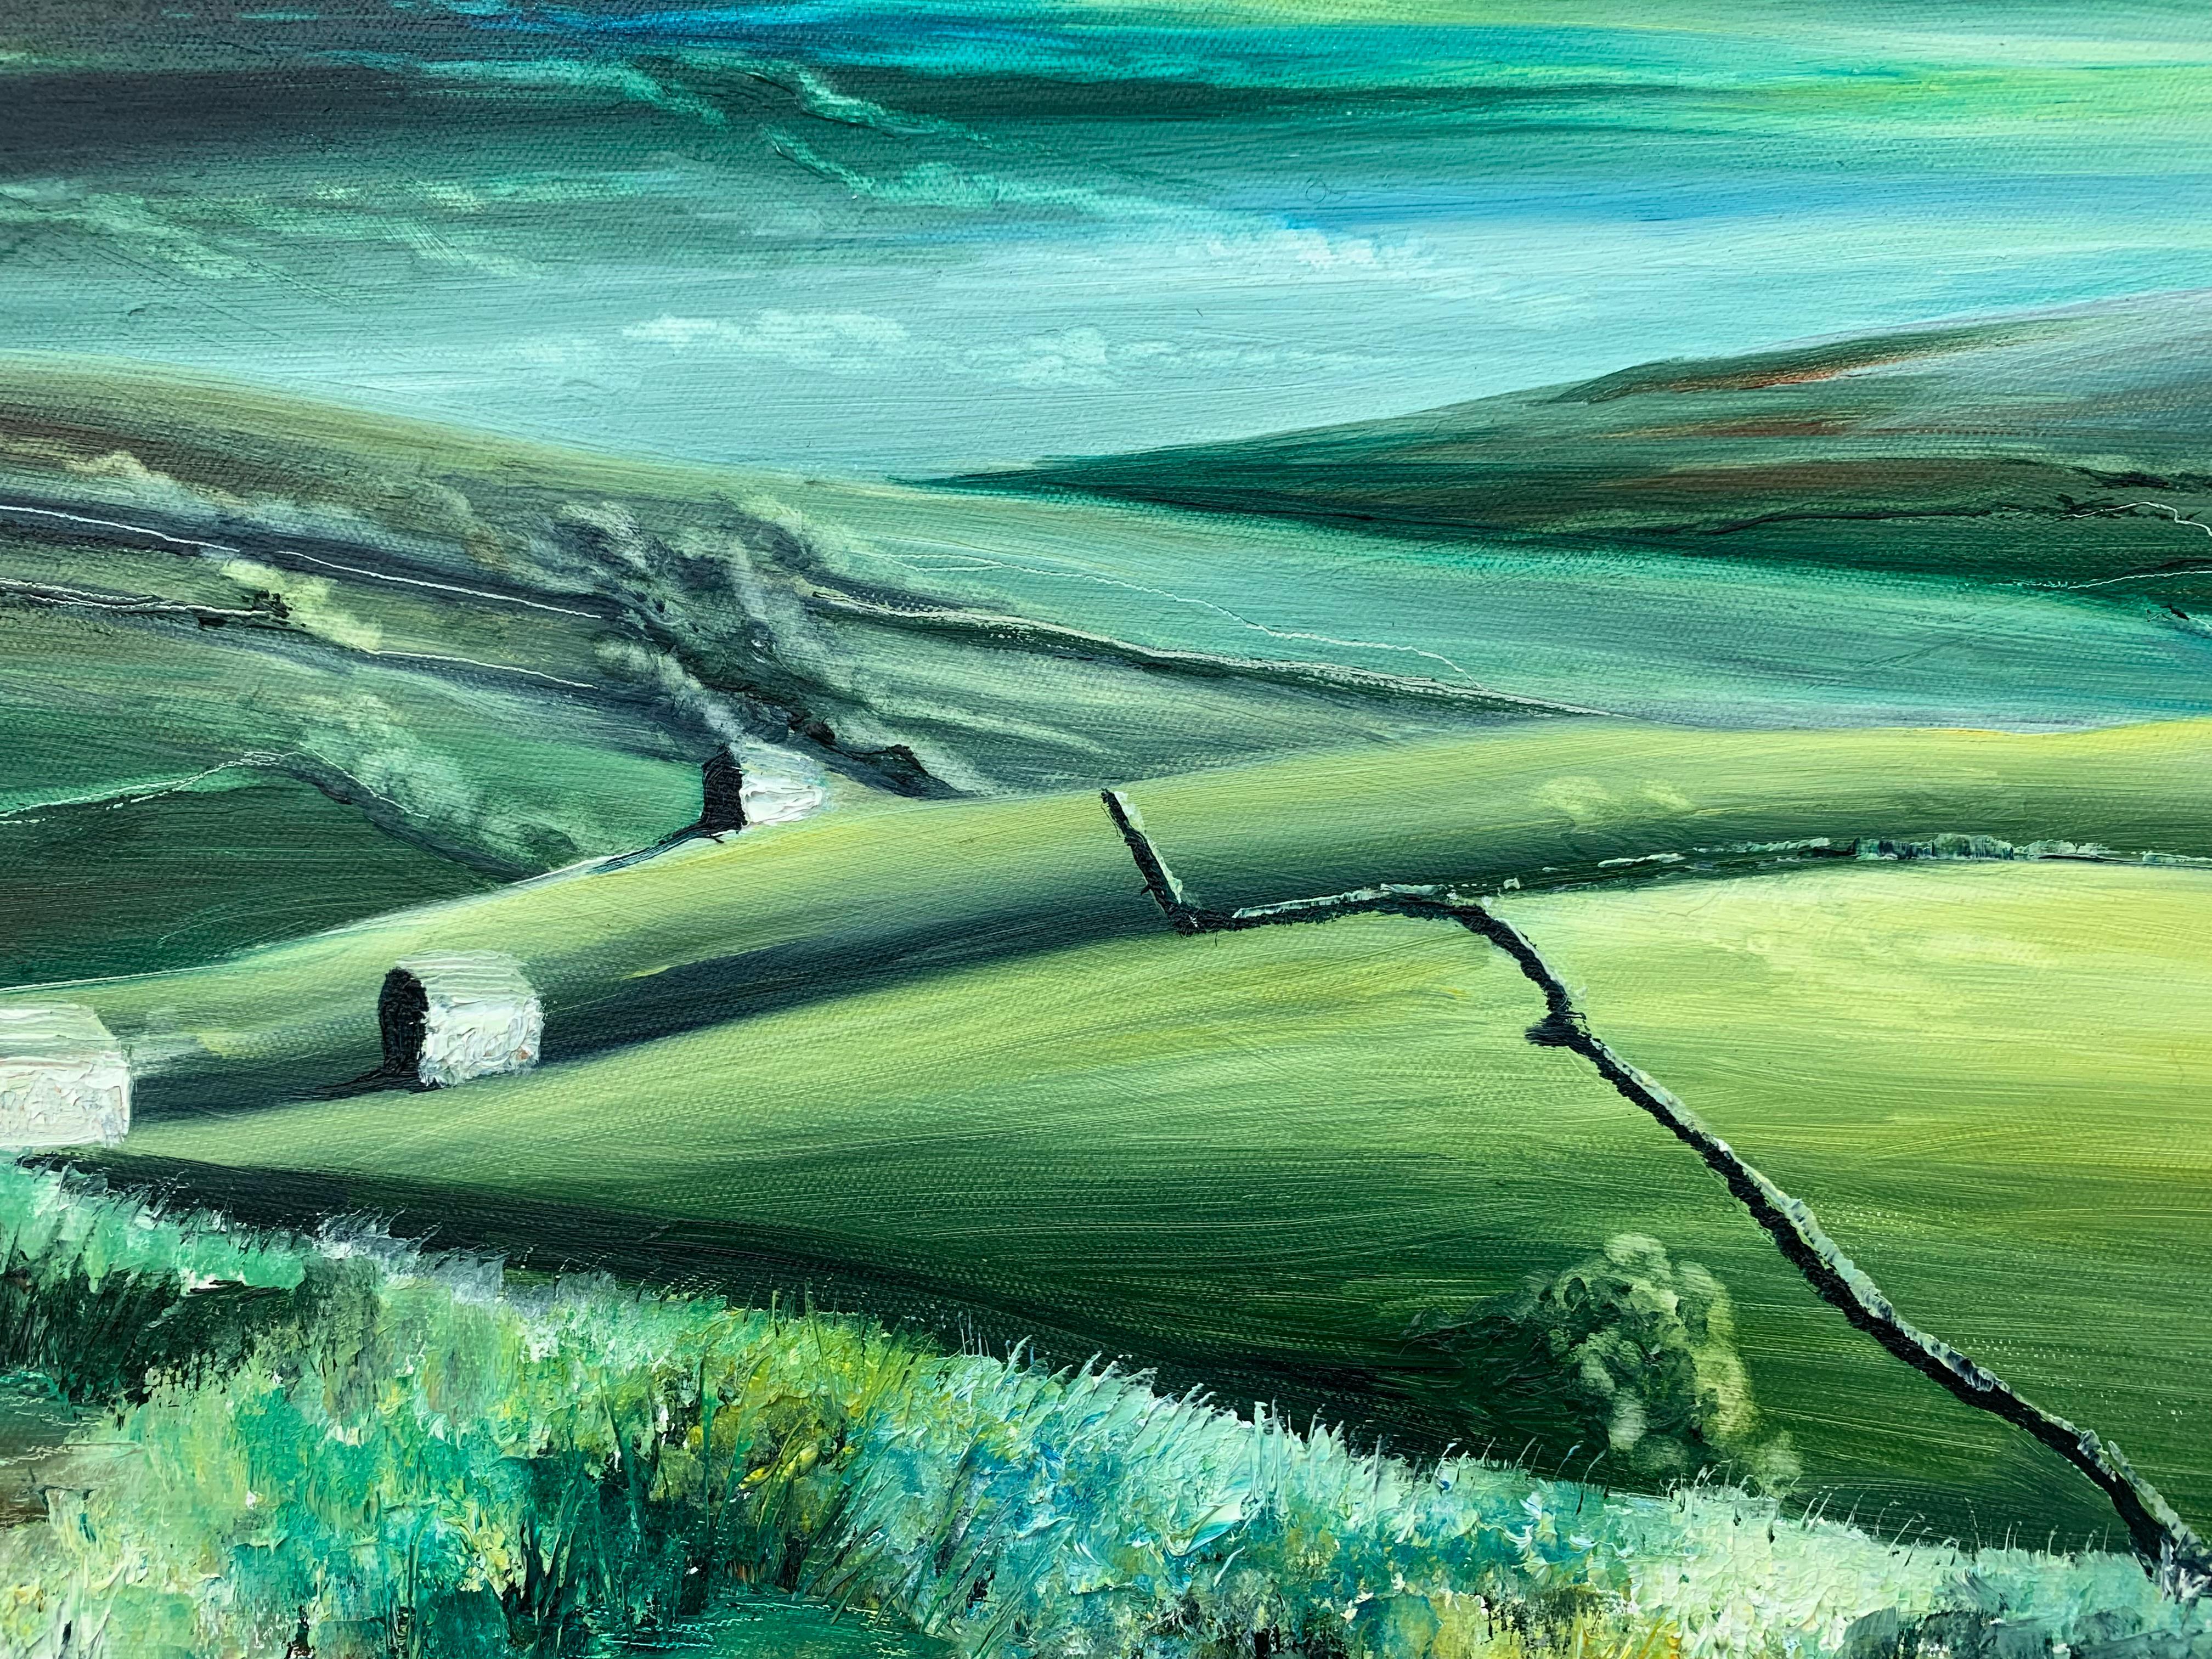 Yorkshire Dales Green Fields Abstract Landscape Oil Painting by British Artist For Sale 1